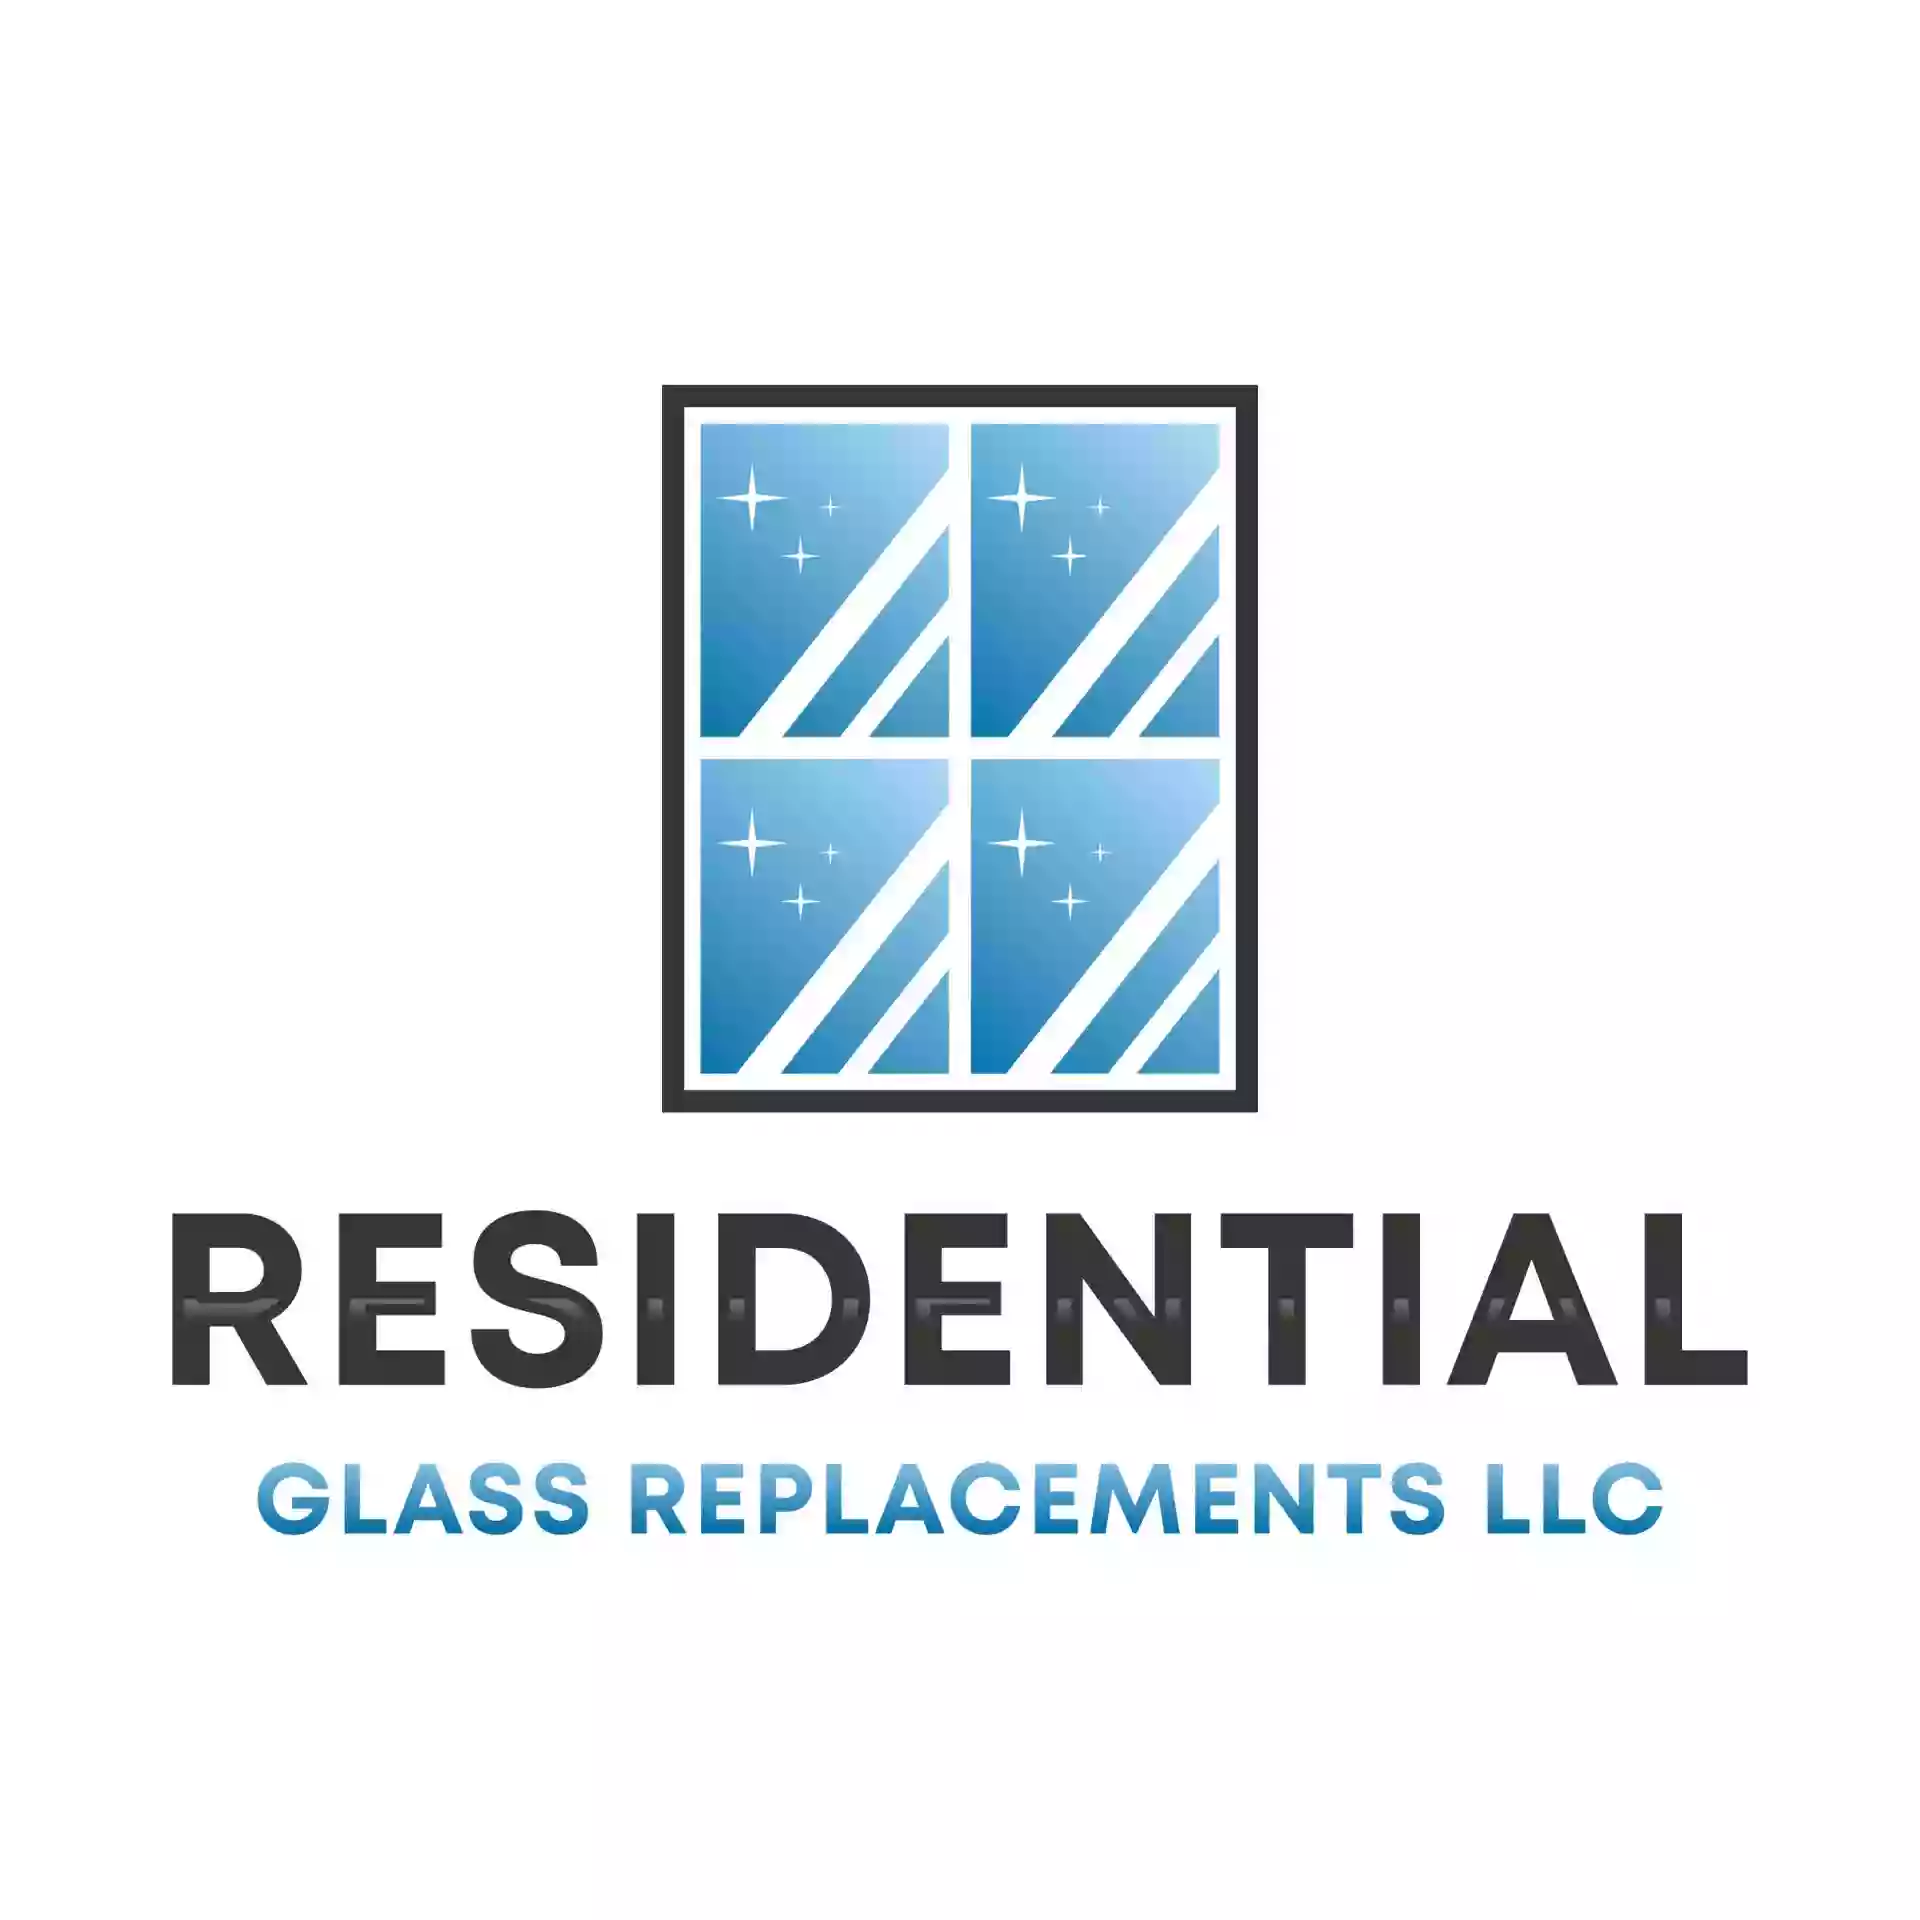 Residential Glass Replacements